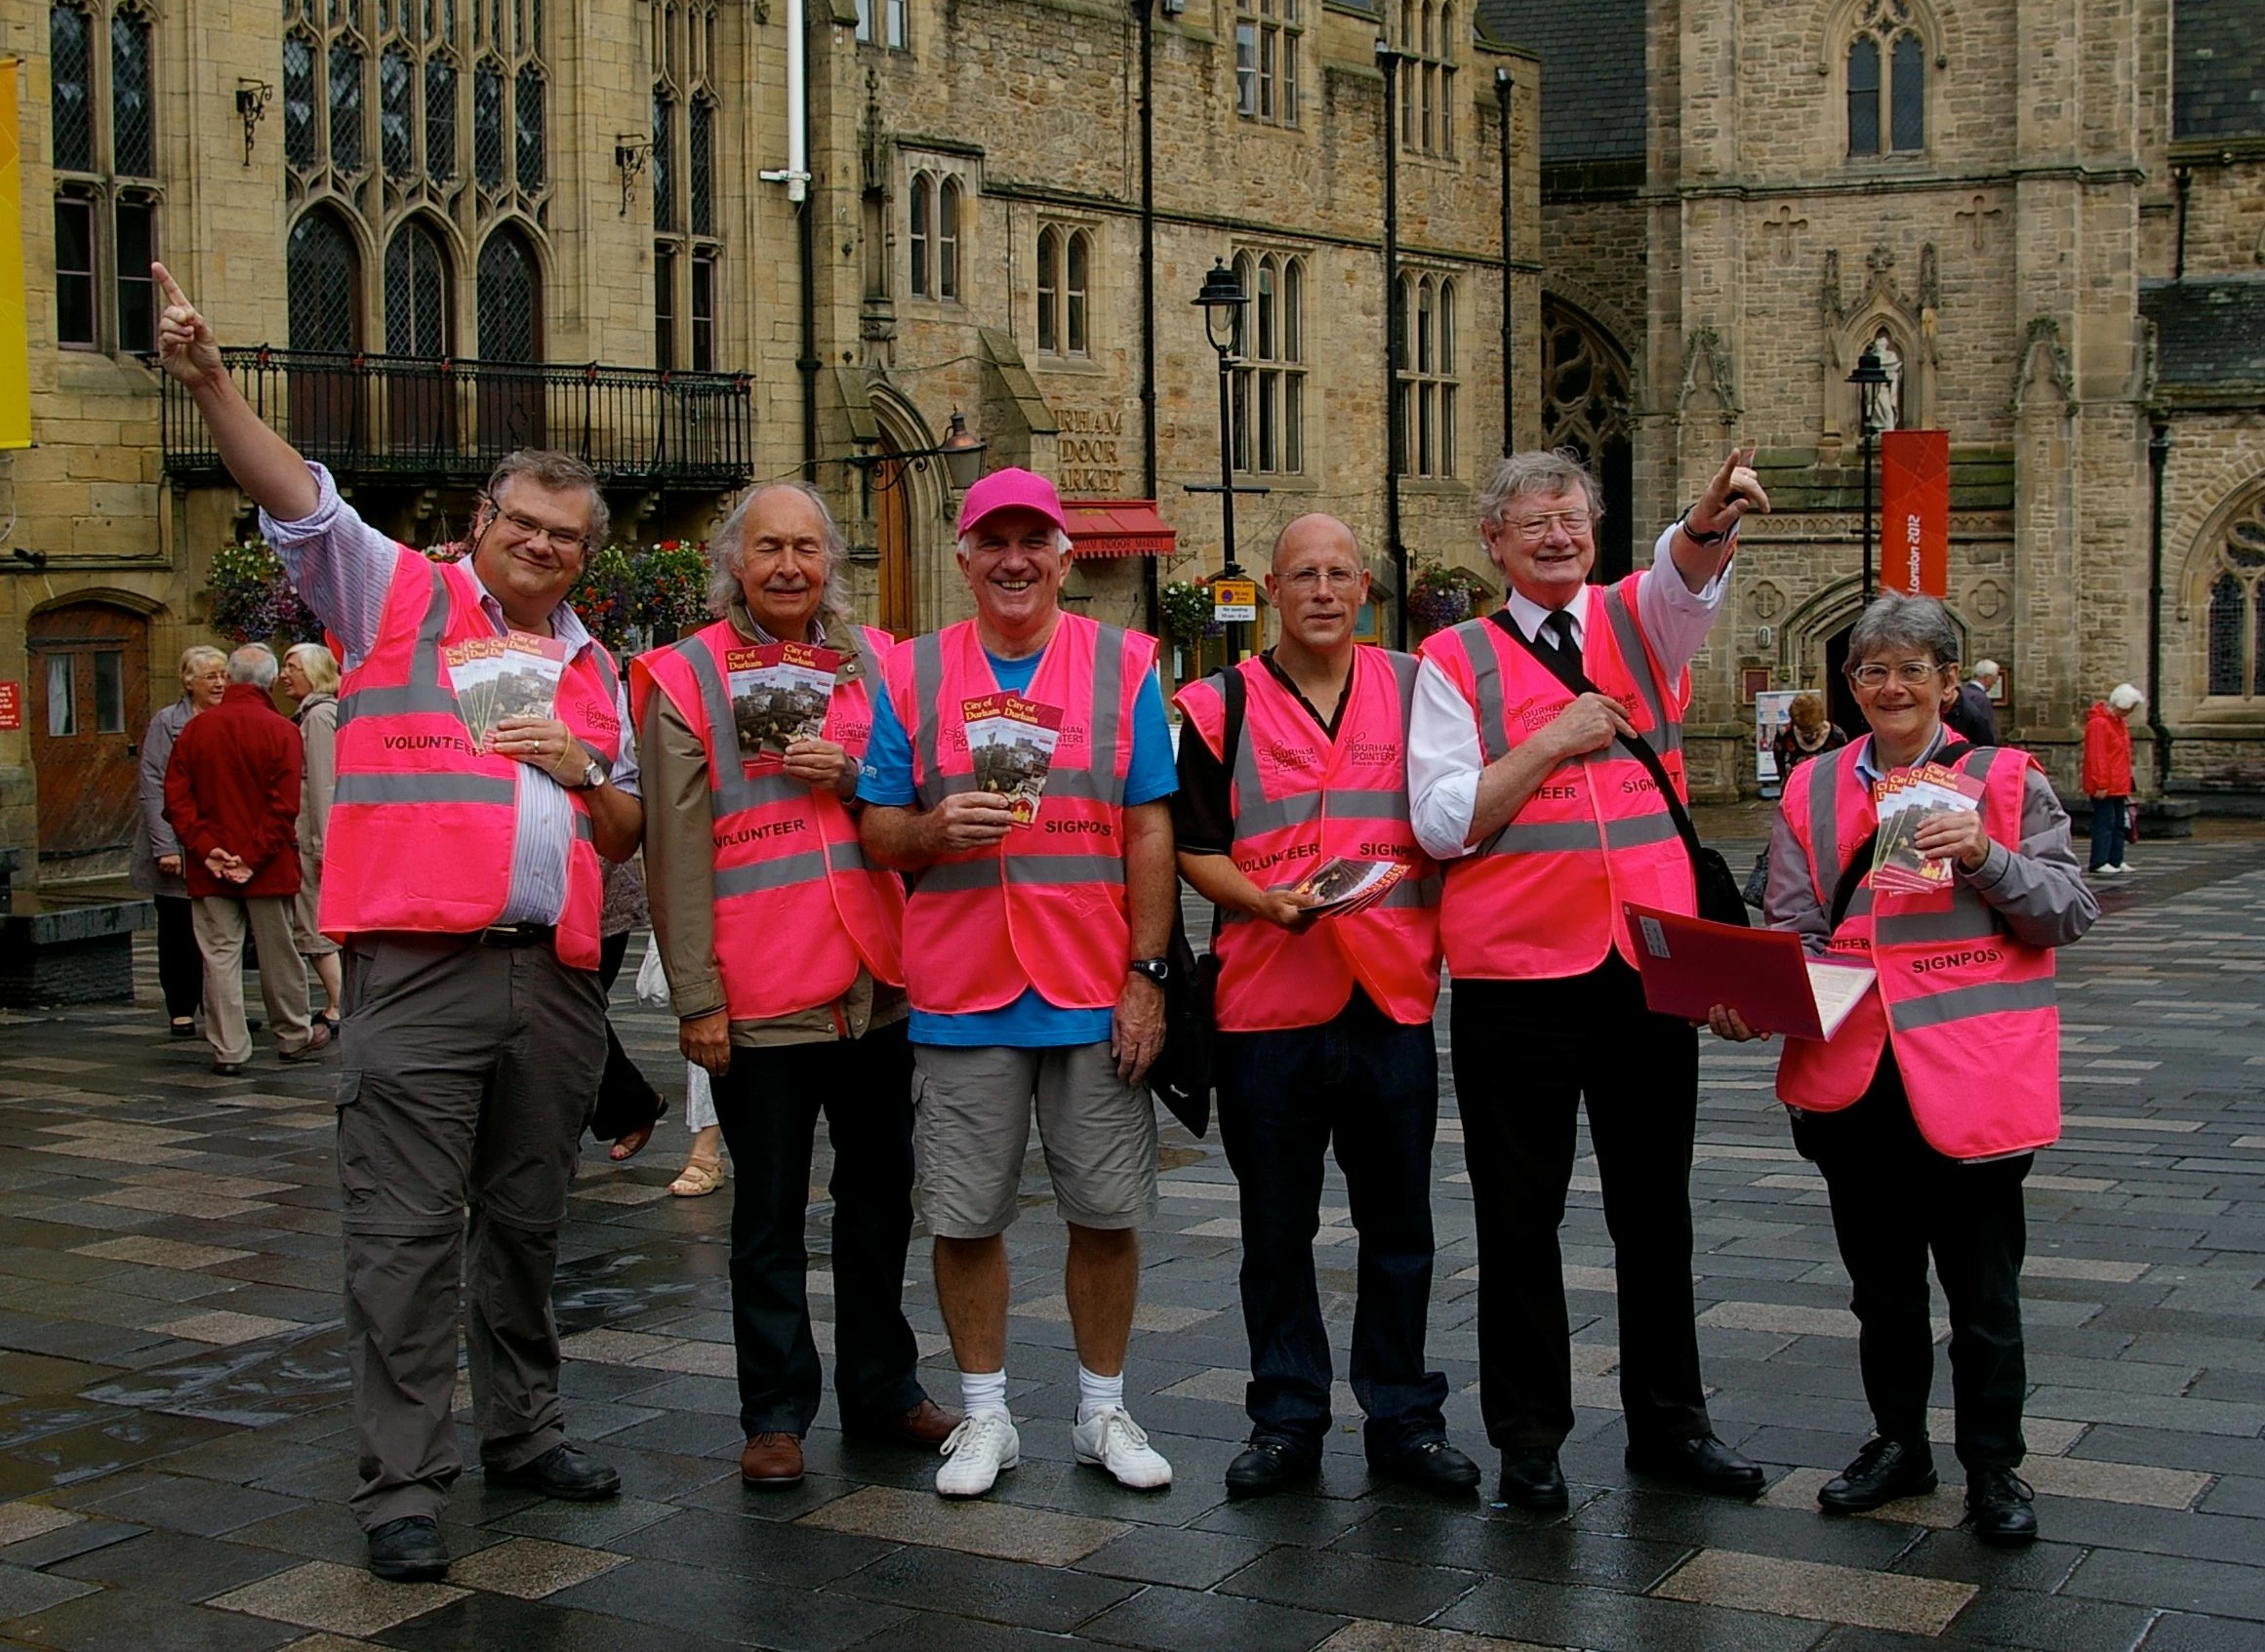 The Pointers in Pink in action in Durham Market Place